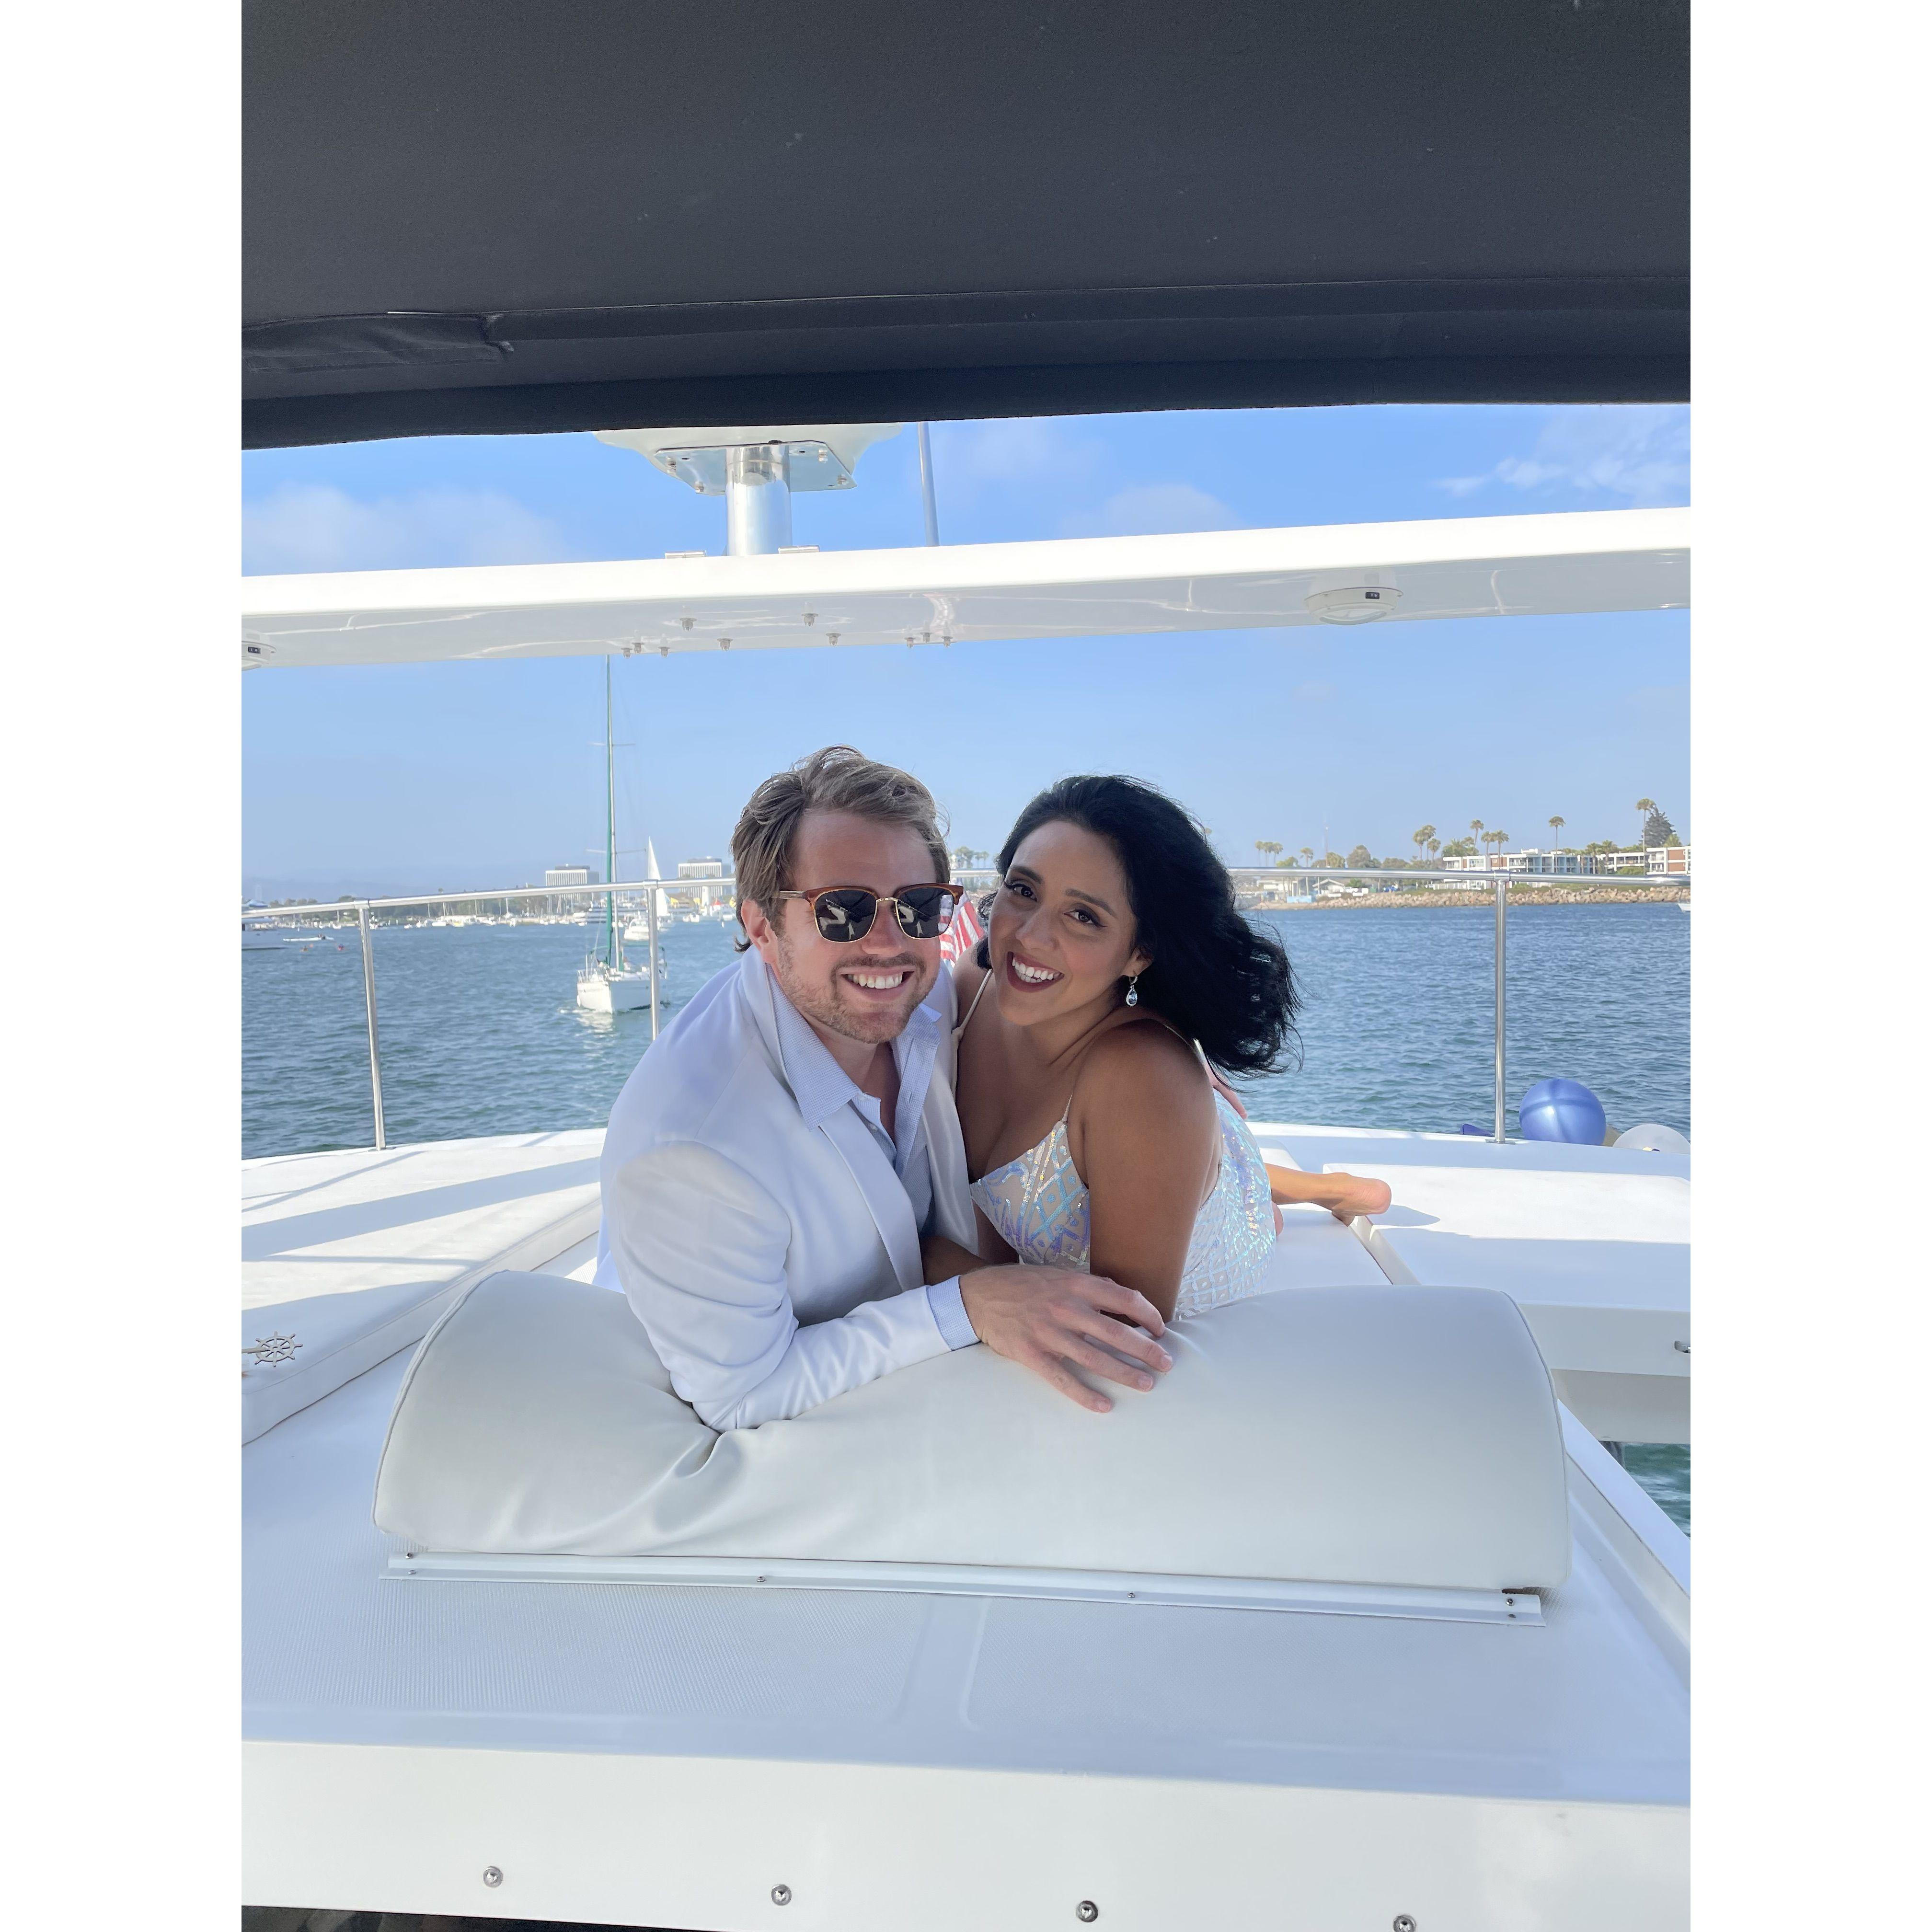 Yacht birthday party in July 2021... Thrilled to. be hosting a yacht party on a much larger scale for our wedding welcome dinner.